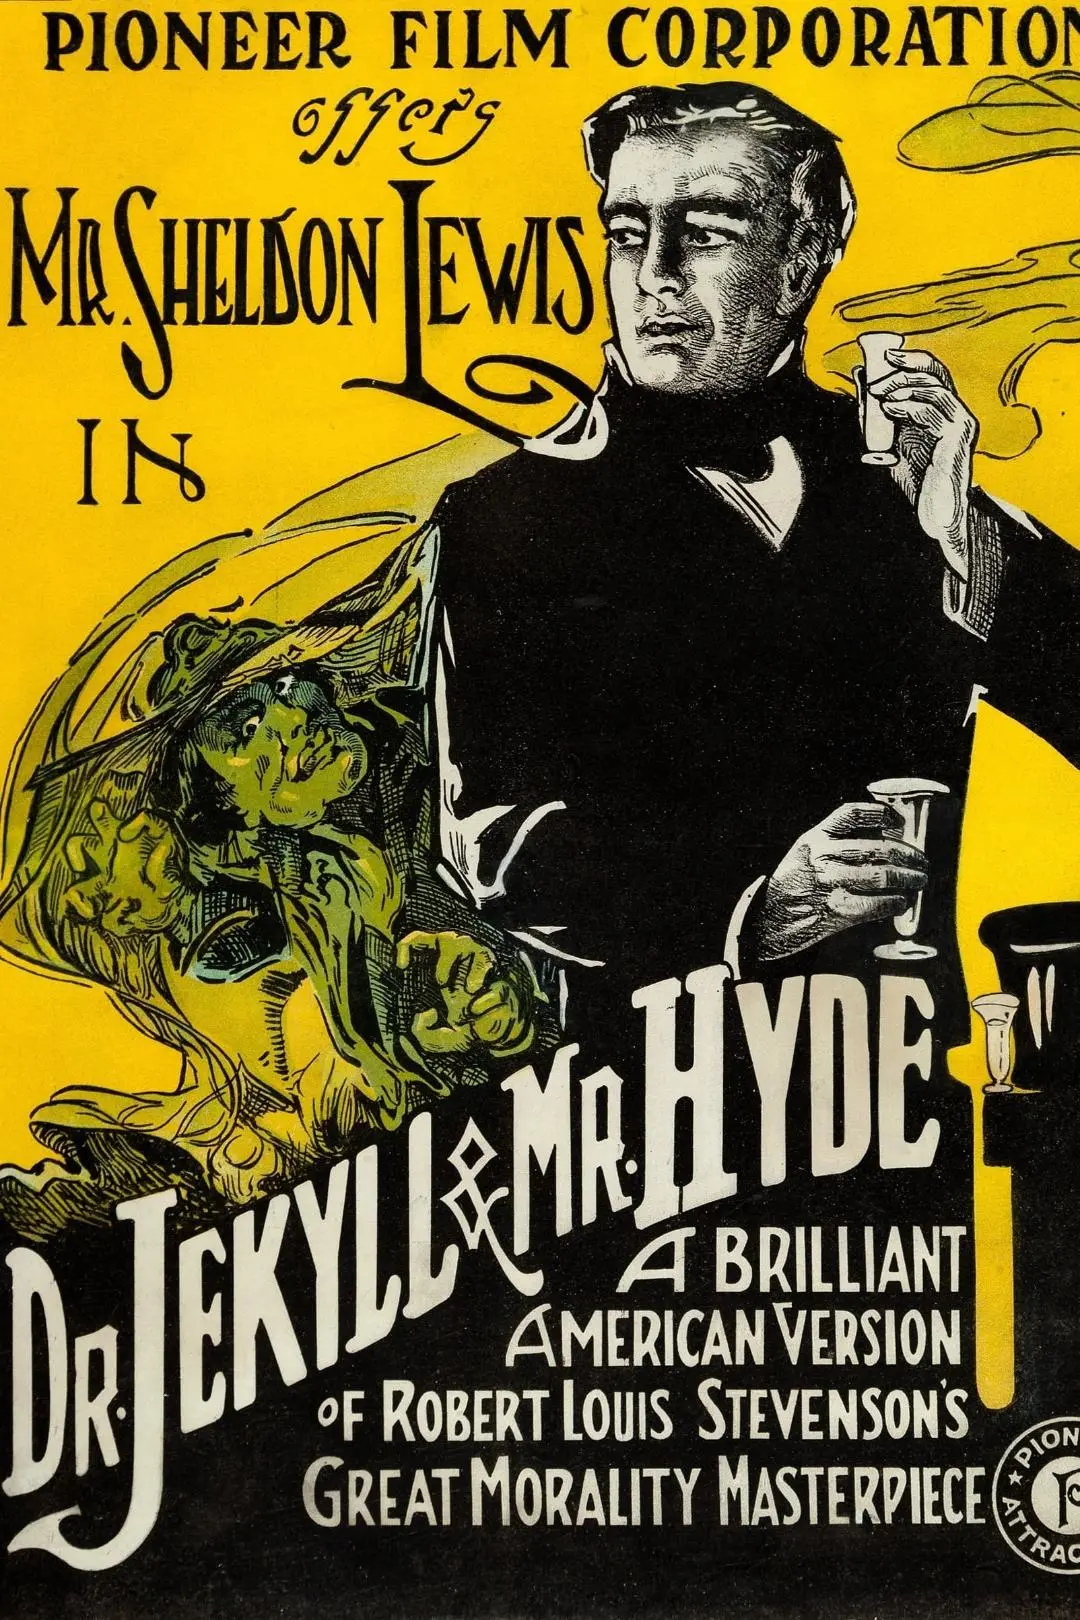 Dr. Jekyll and Mr. Hyde_peliplat